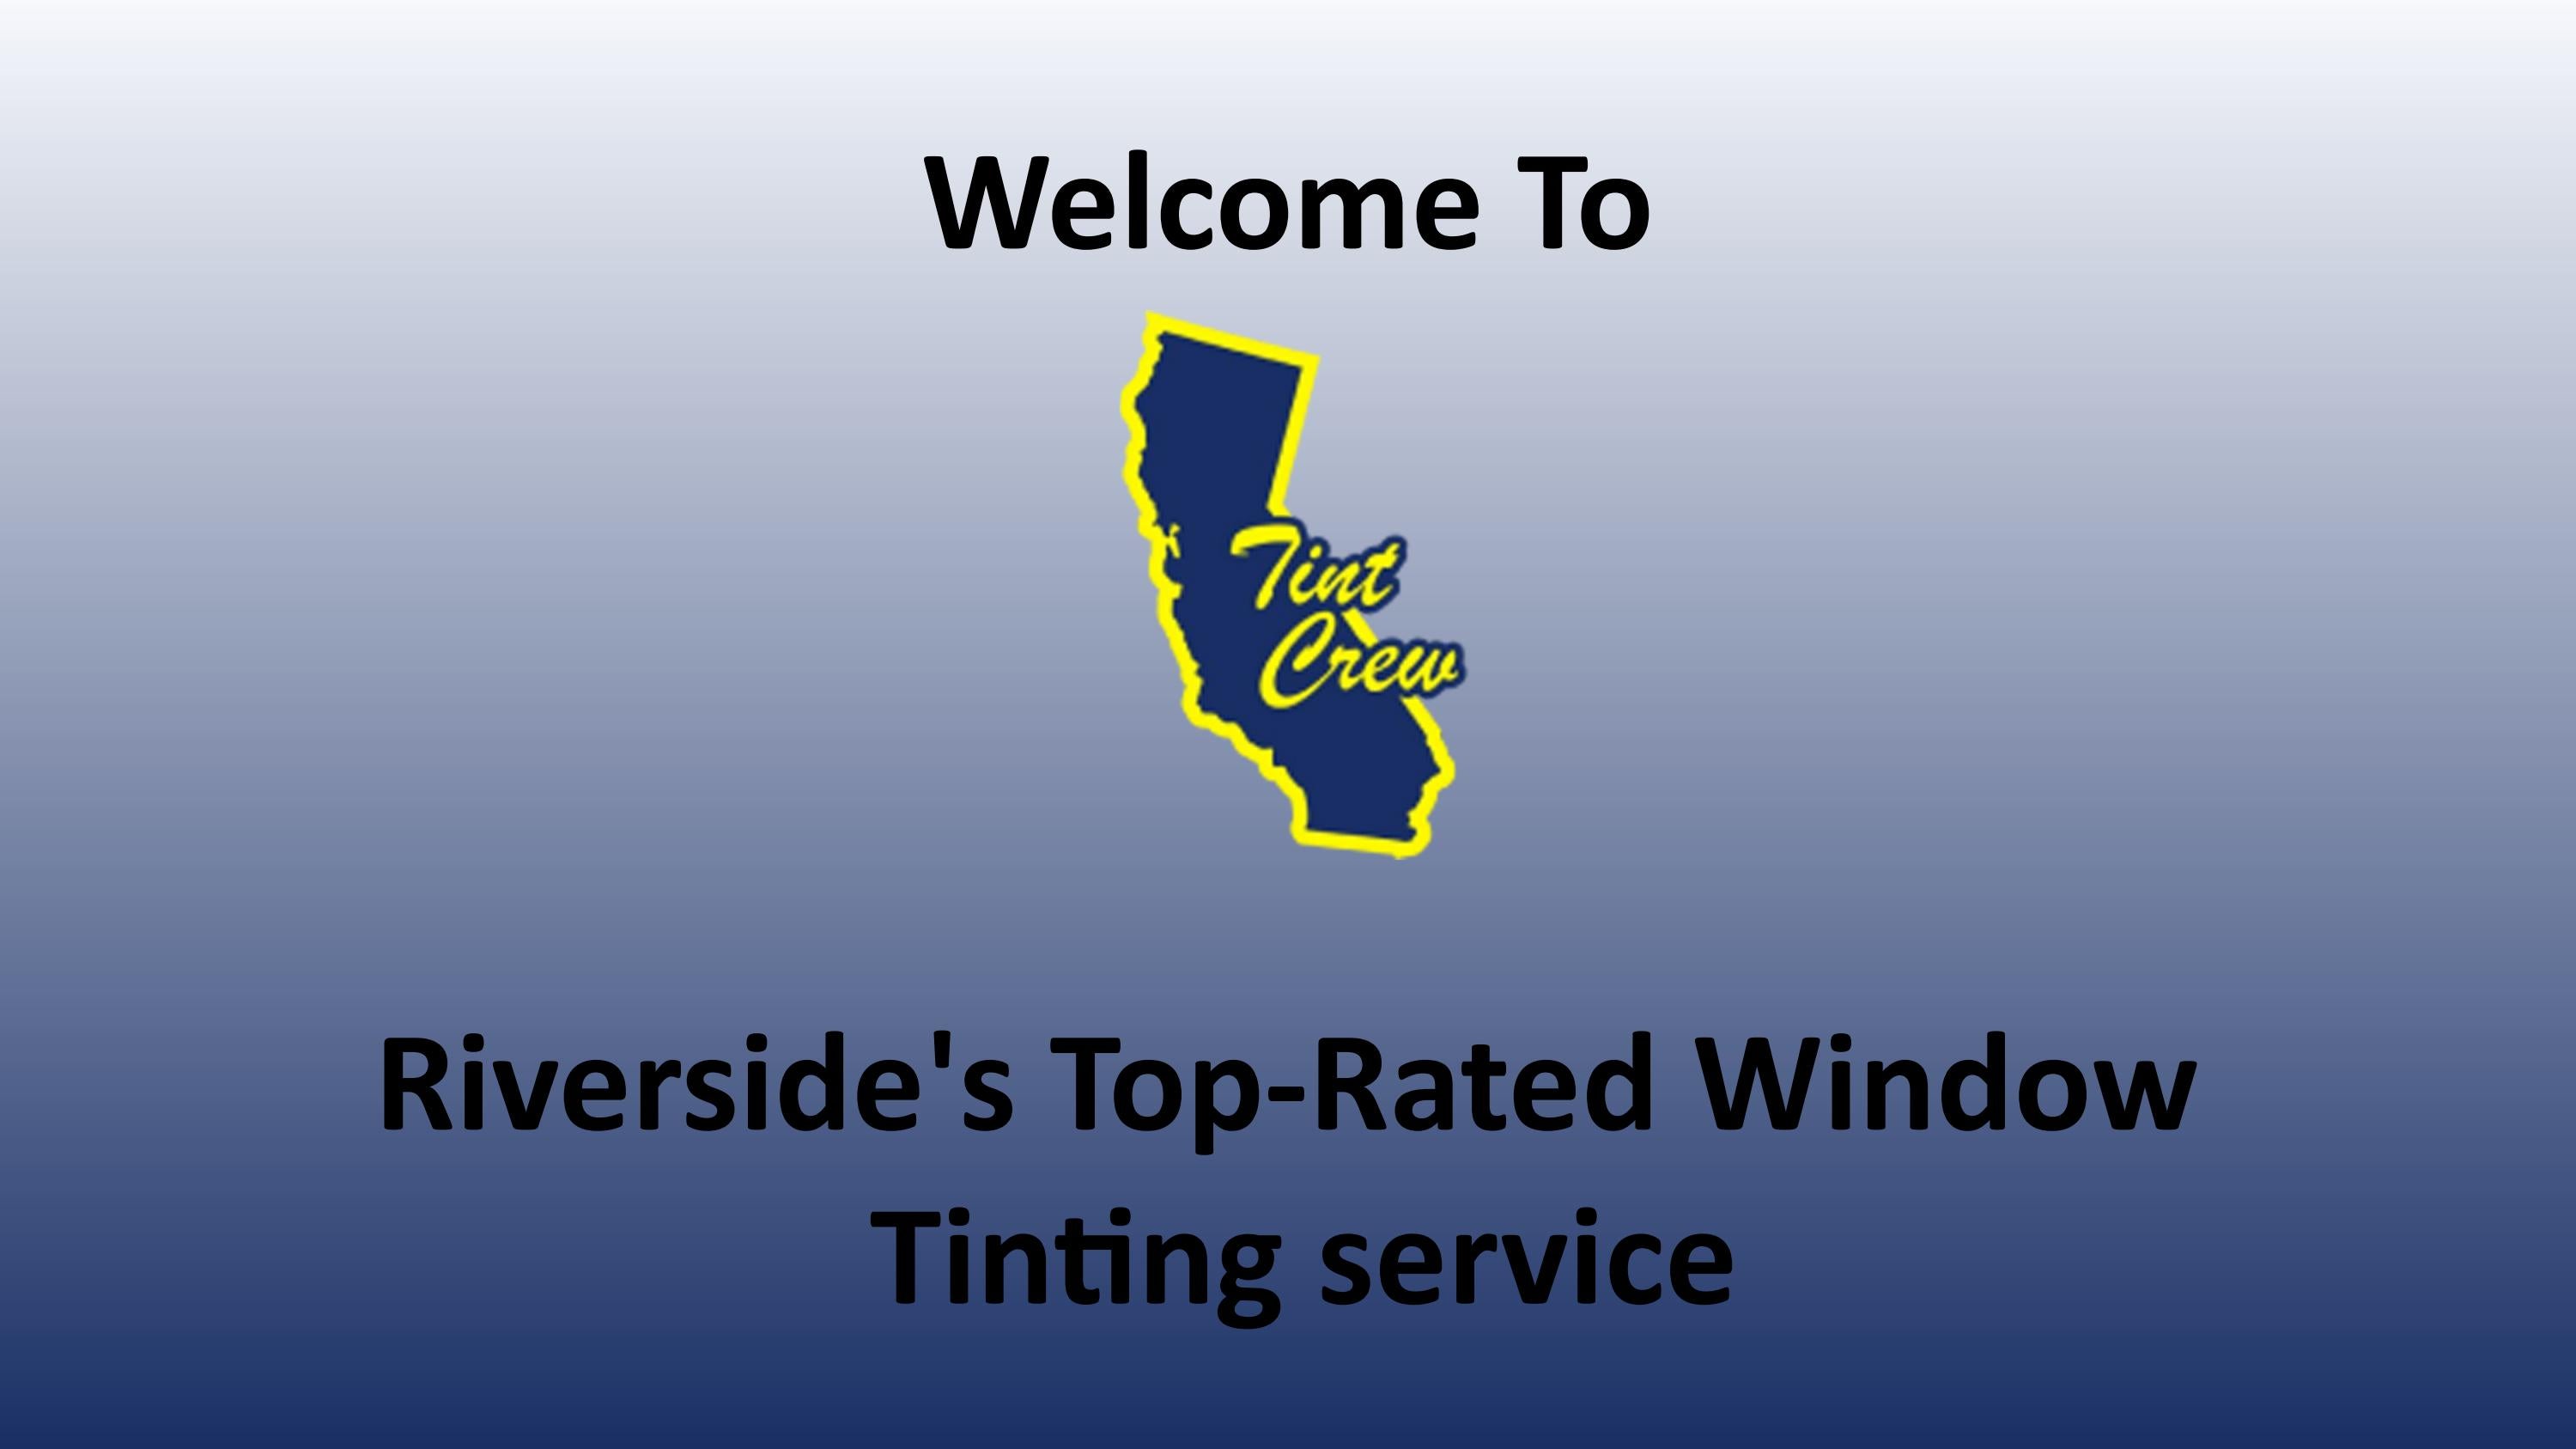 Get a Quote! Top-Rated Window Tinting by California Tint Crew